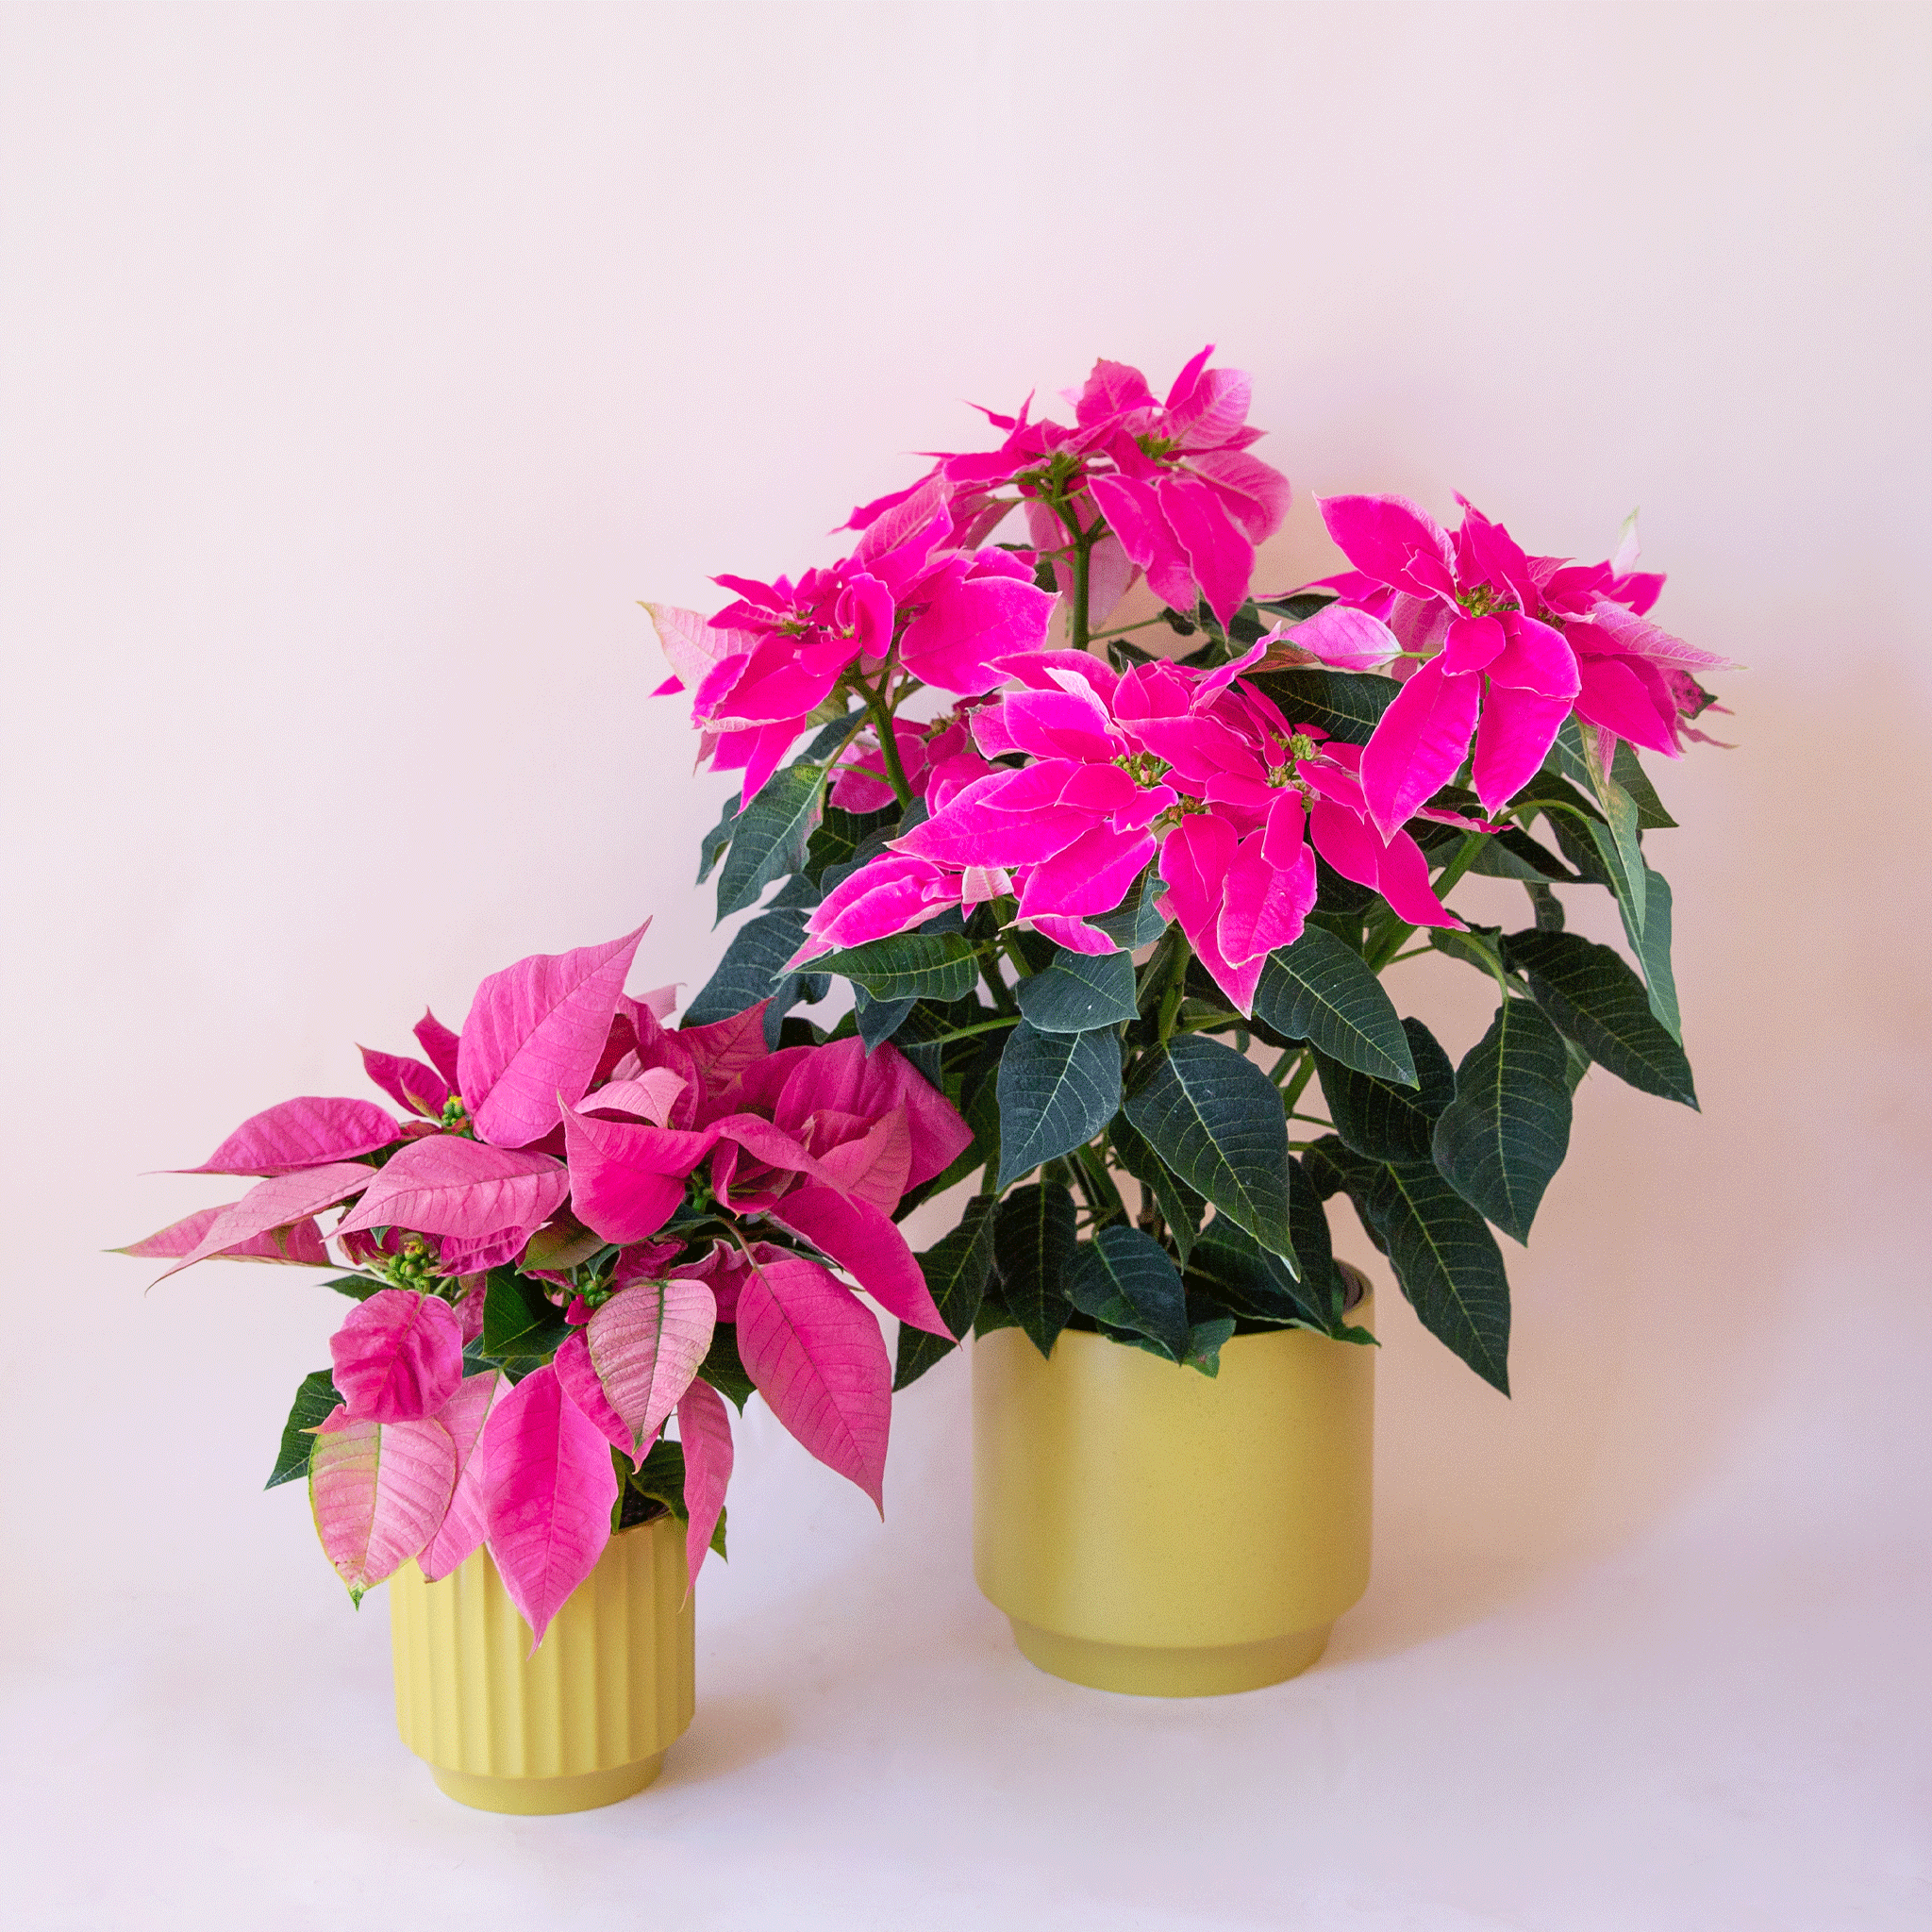 On a light pink background is two of the palm colored pots filled with hot pink poinsettias. 